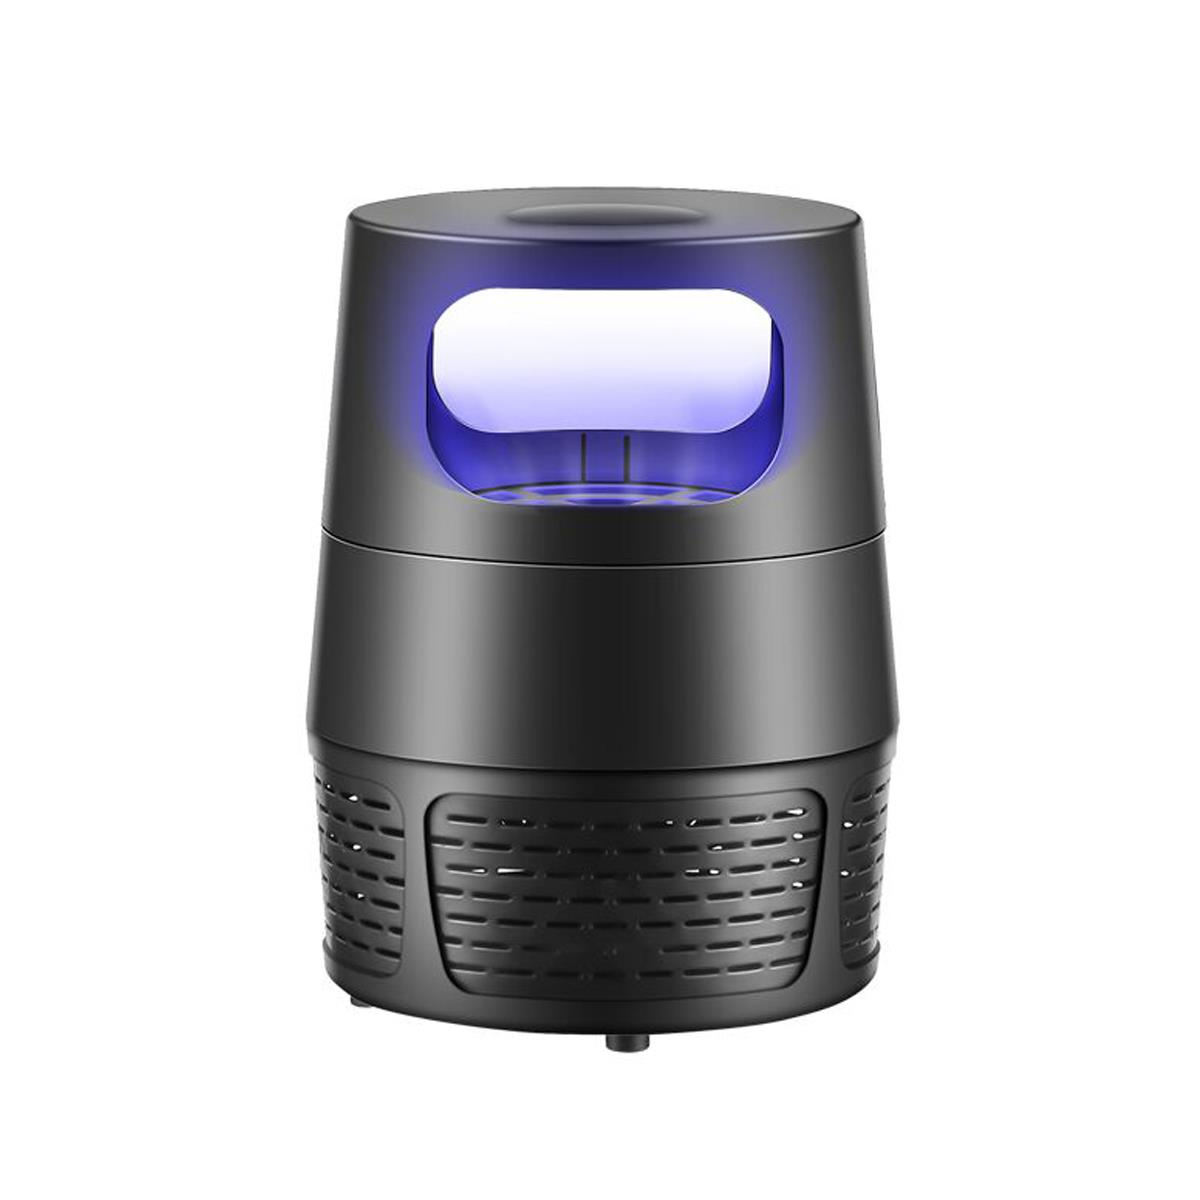 

5V USB LED Mosquito Killer Lamp Insect Fly Bug Zapper Trap Pest Control UV Light Mosquito Dispeller